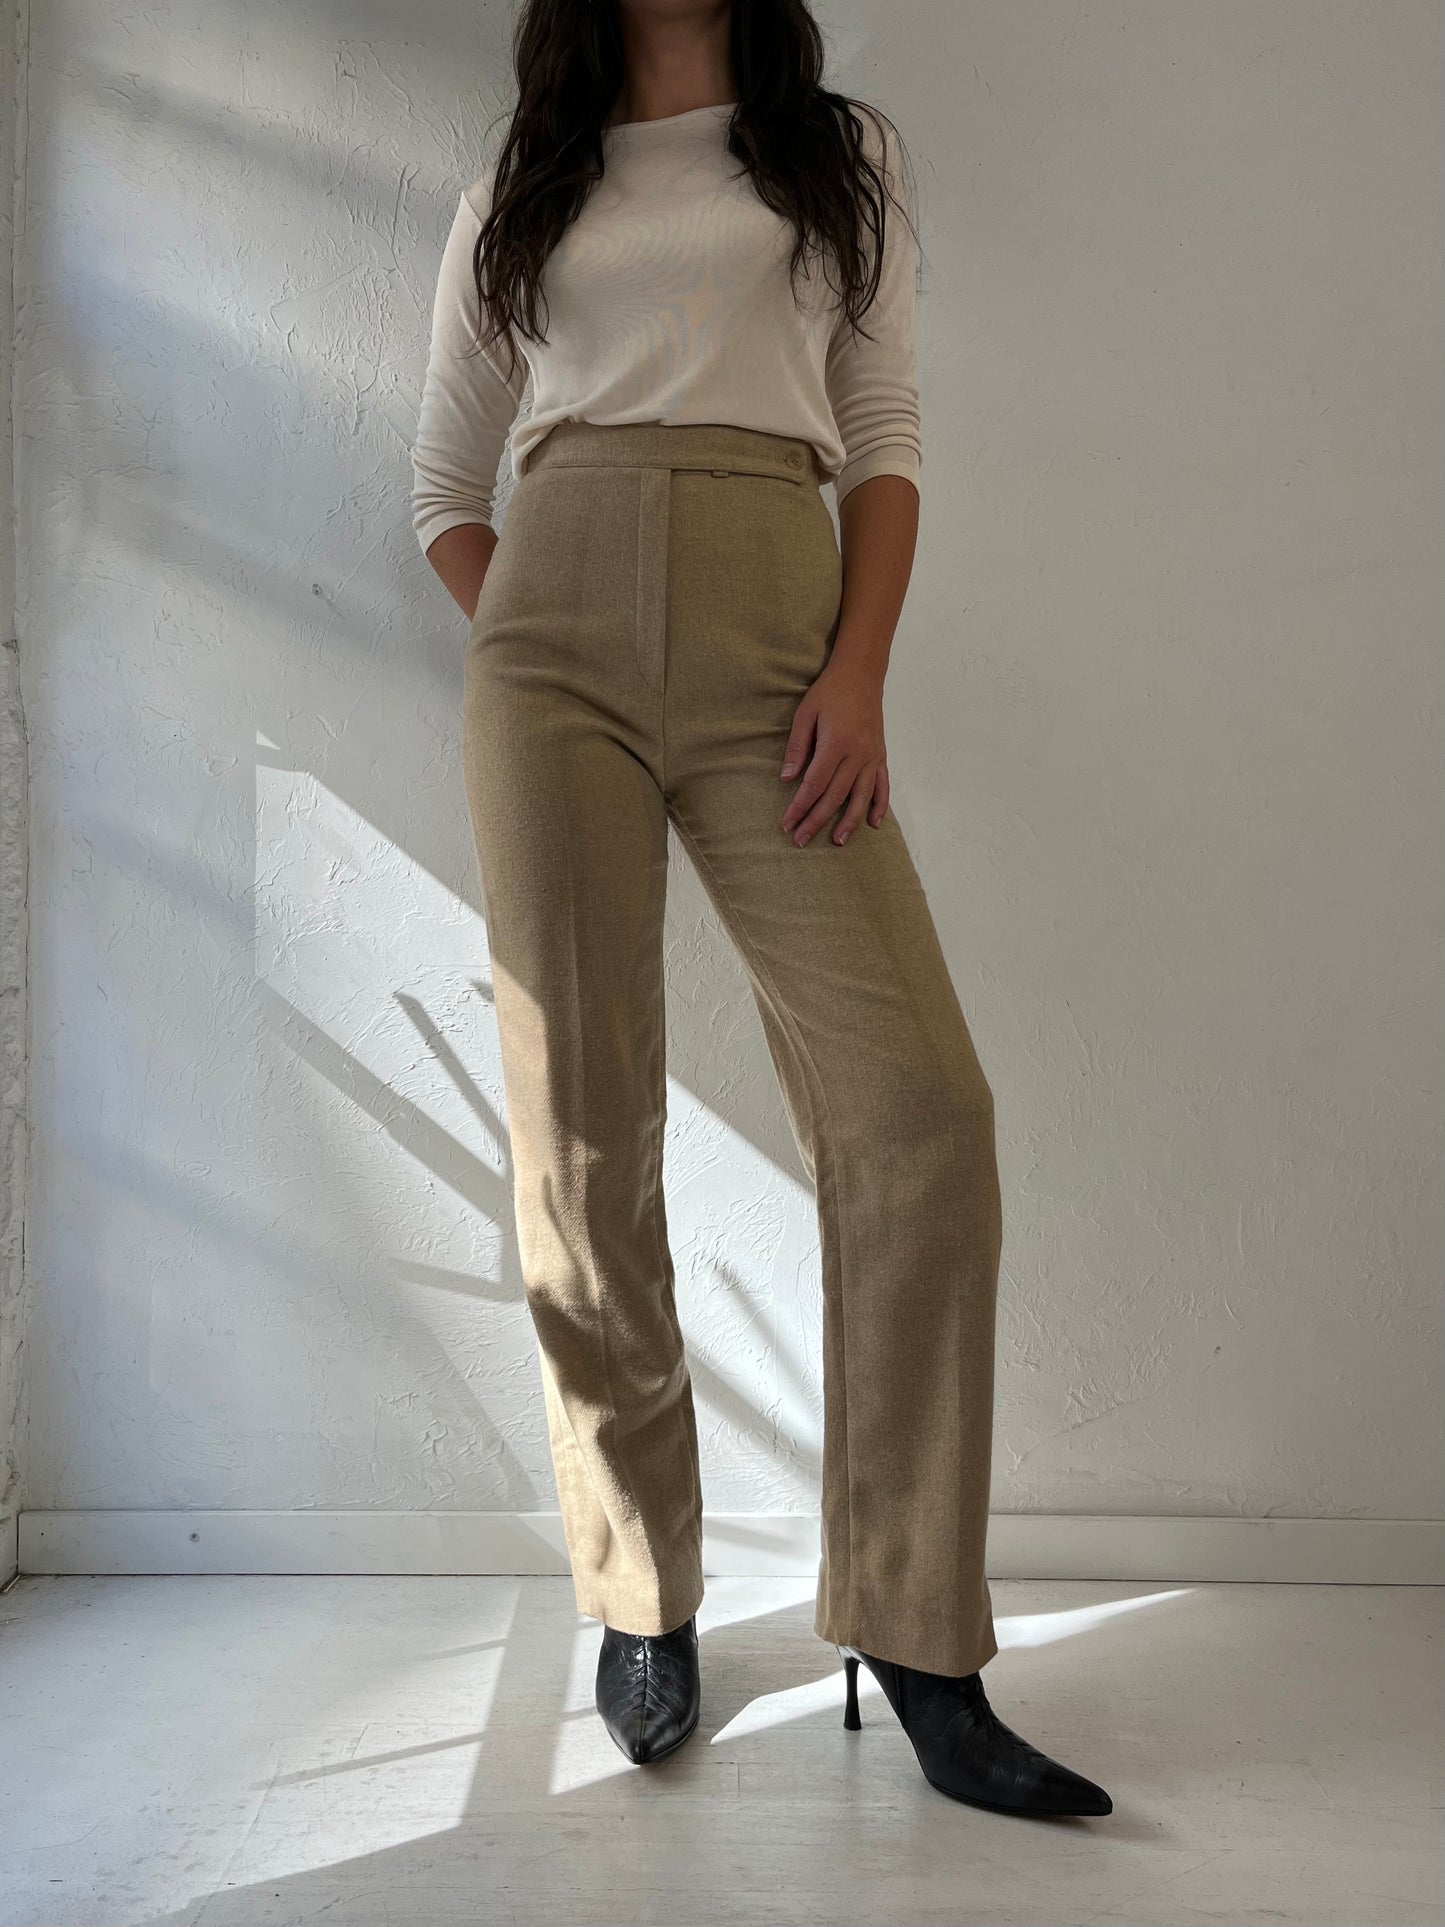 70s 'College Town' Tan Trousers / Small